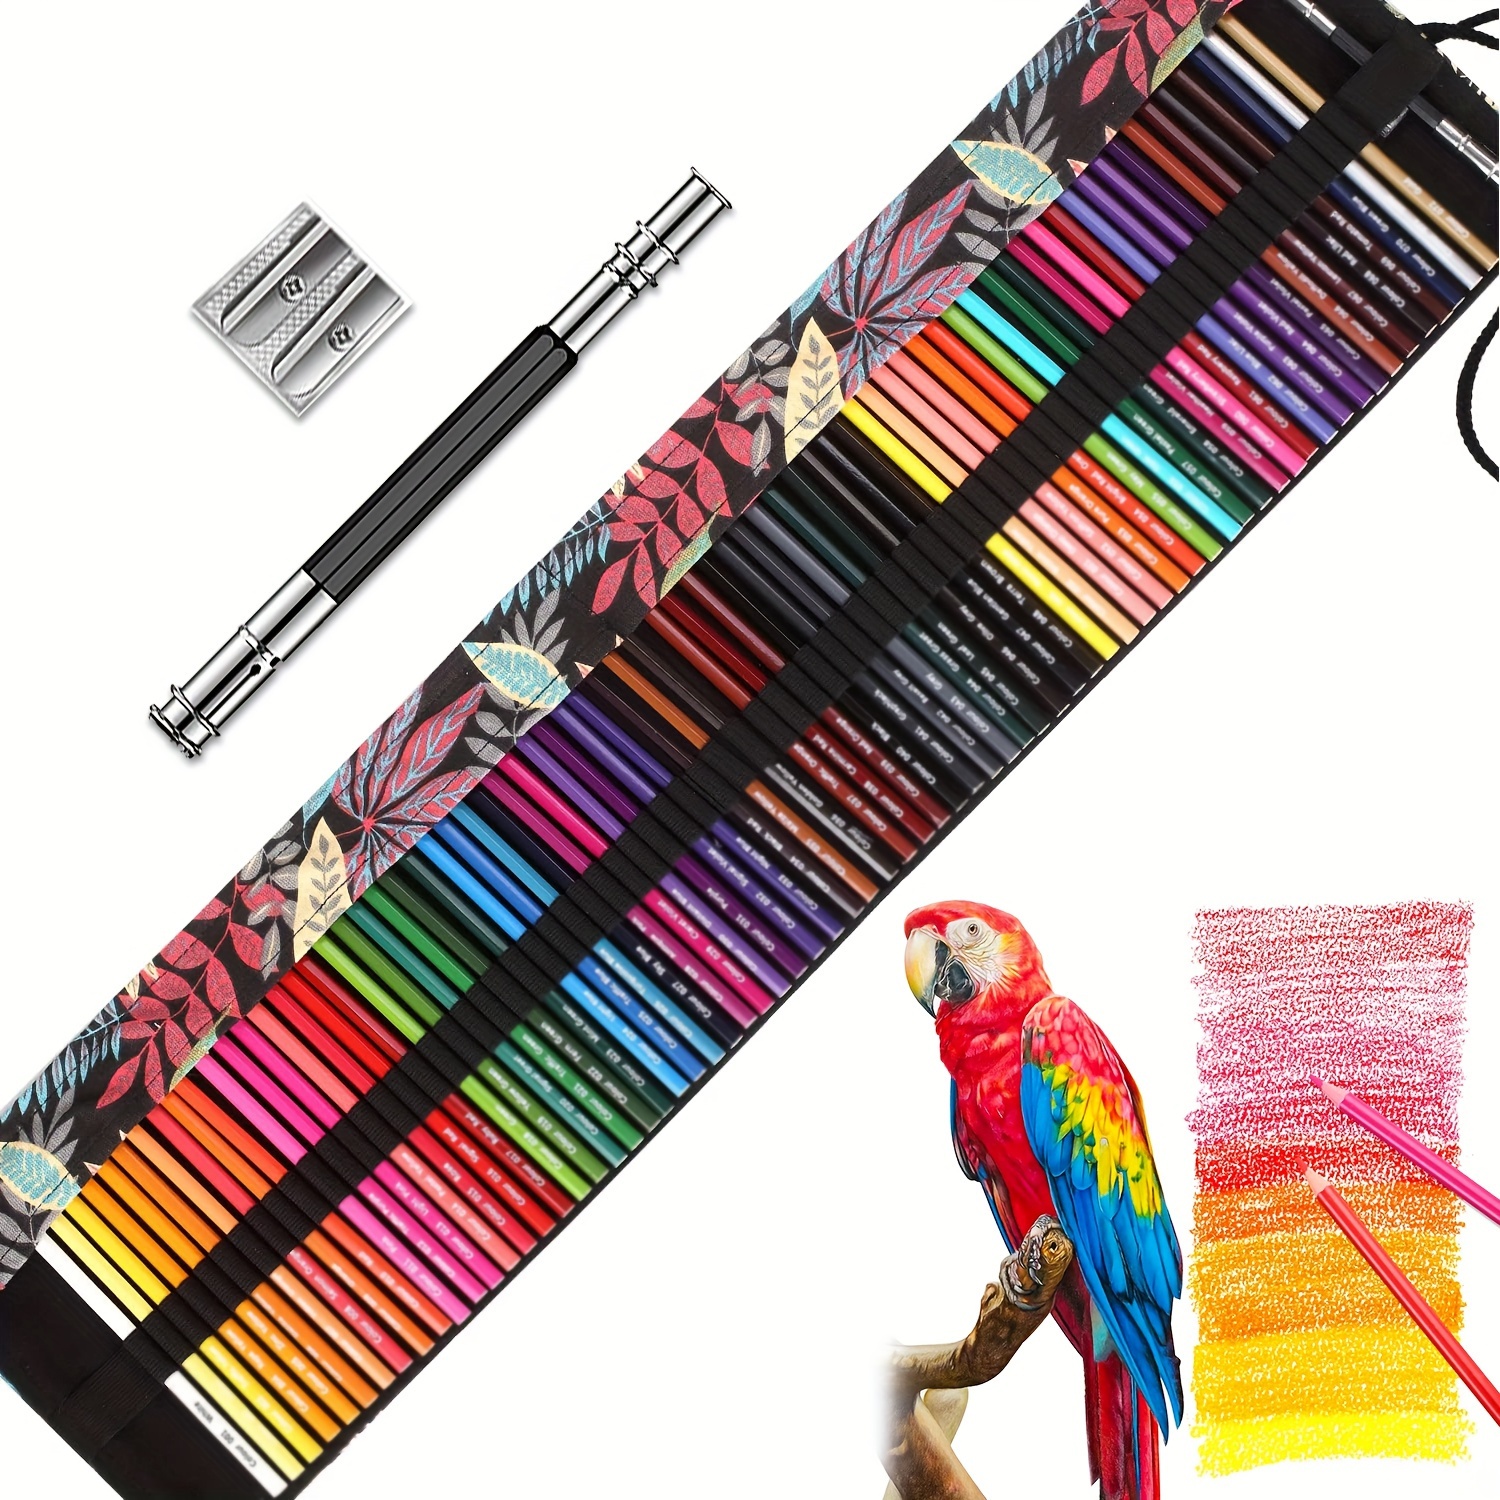 134 Colored Pencils Set-120 Colored Pencils,Adult Coloring Book and Sketch  Pad,Artists Colorless Blender,Zipper Travel Case,Soft Core,Ideal for